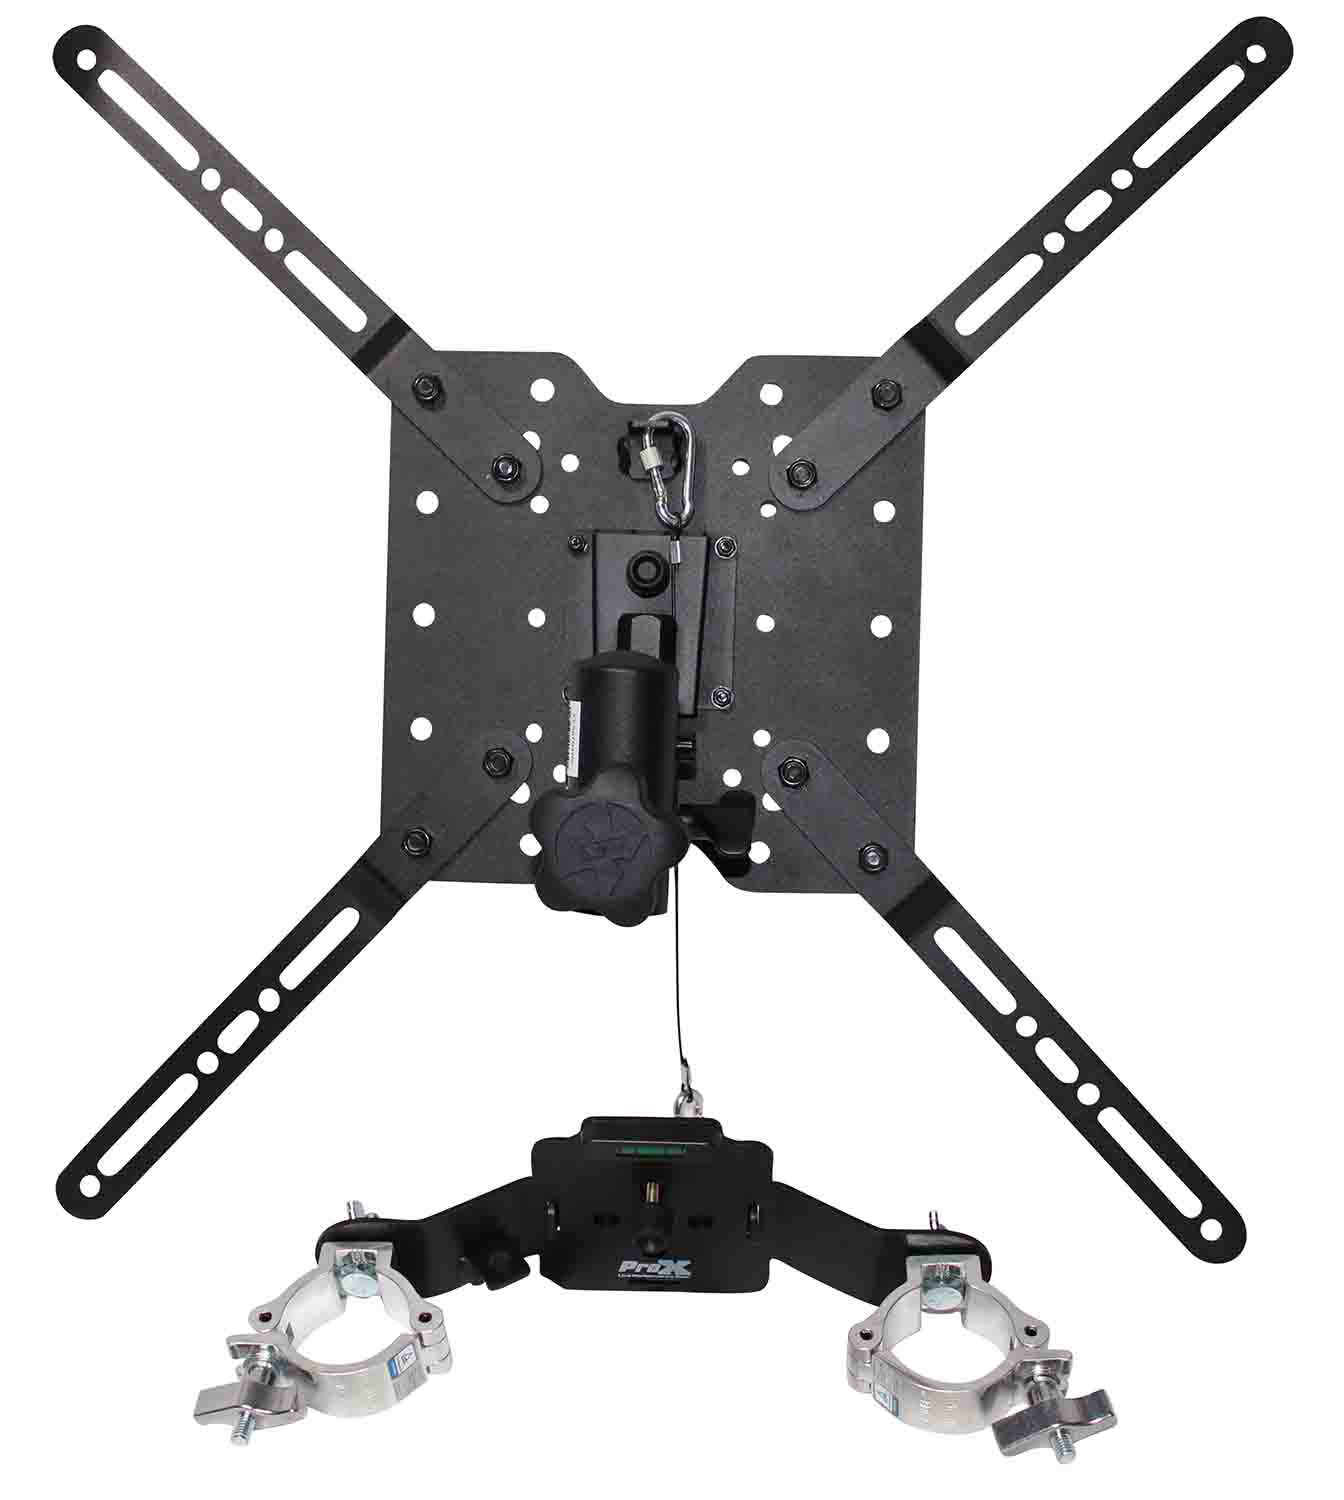 ProX XT-MEDIAMOUNT Universal 32" to 80" TV Bracket Clamp with Vesa Mount for F34 F32 and 12" Bolt Truss or Speaker Stands by ProX Cases